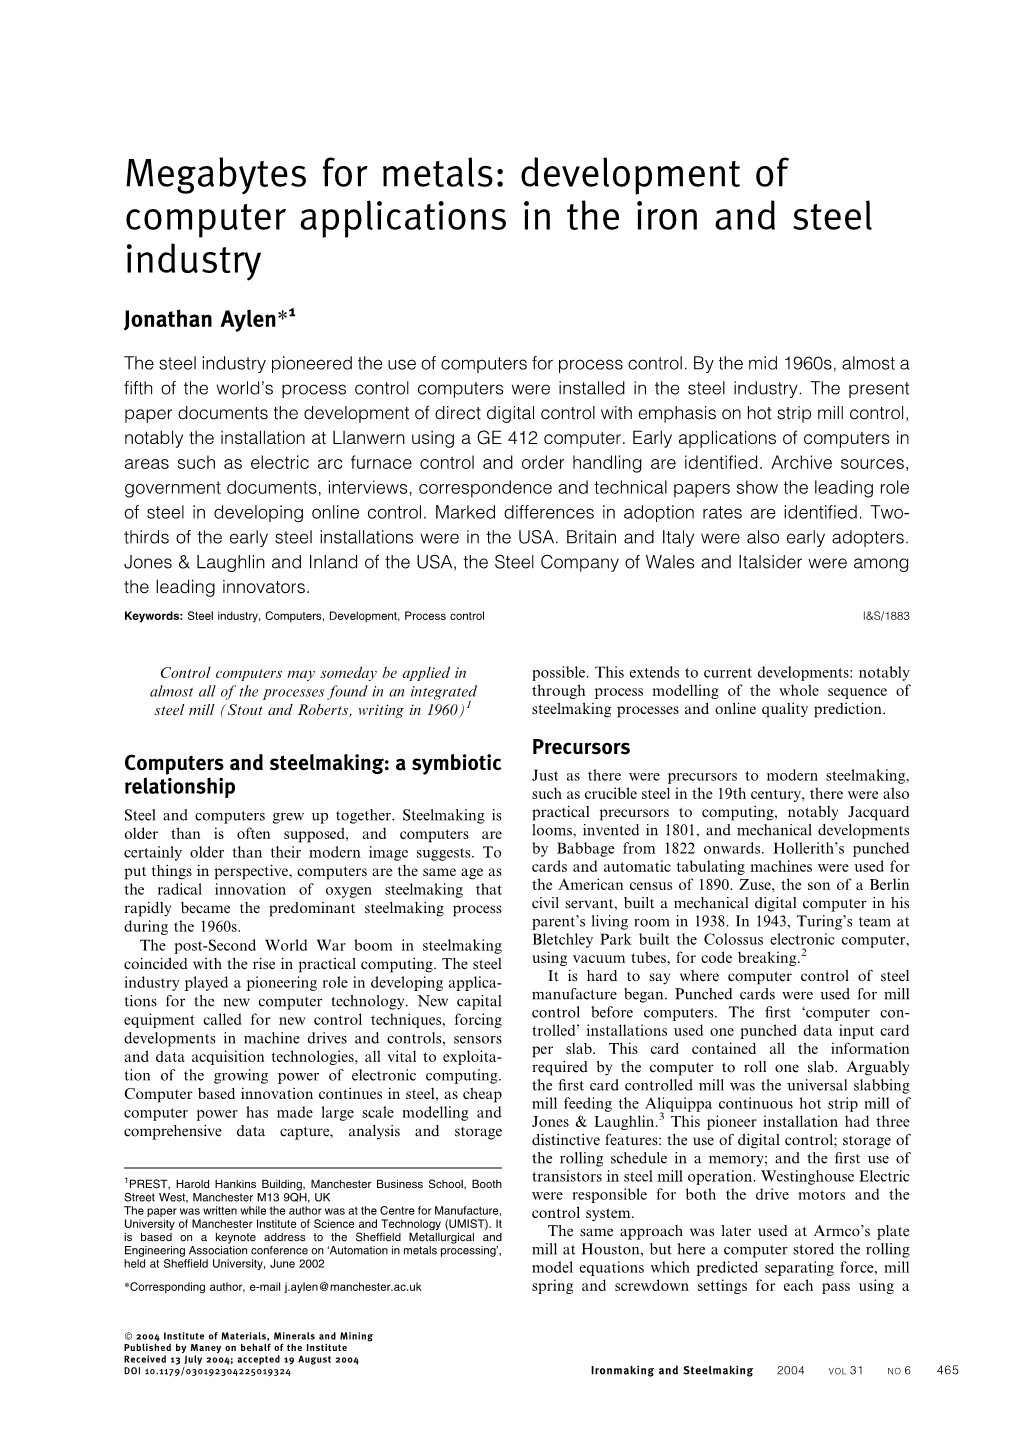 Development of Computer Applications in the Iron and Steel Industry